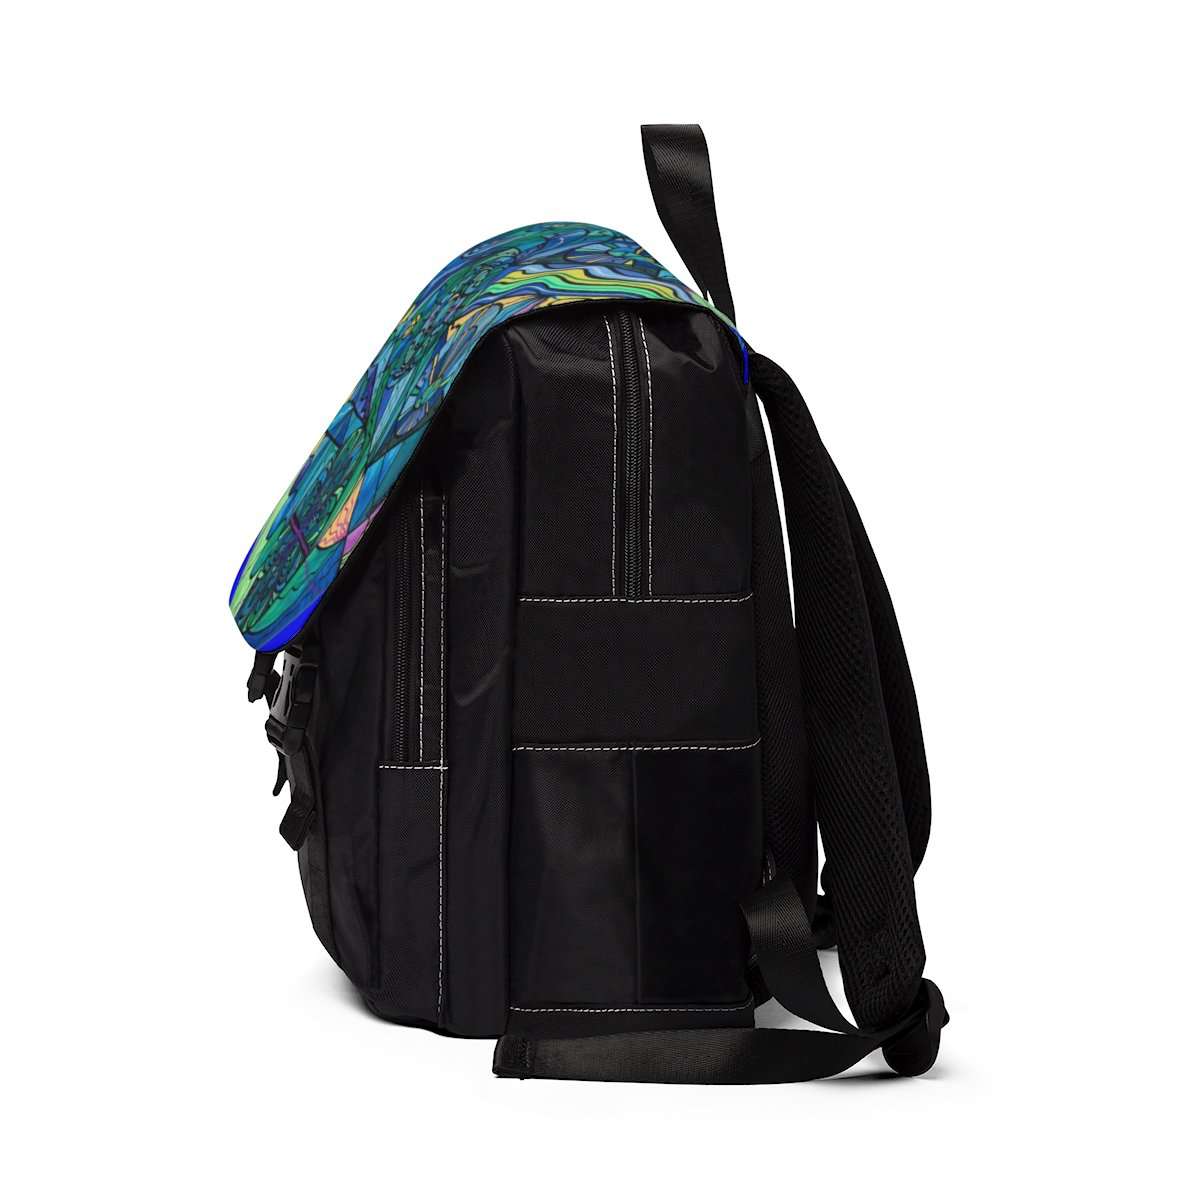 the-official-website-of-arcturian-immunity-grid-unisex-casual-shoulder-backpack-on-sale_2.jpg